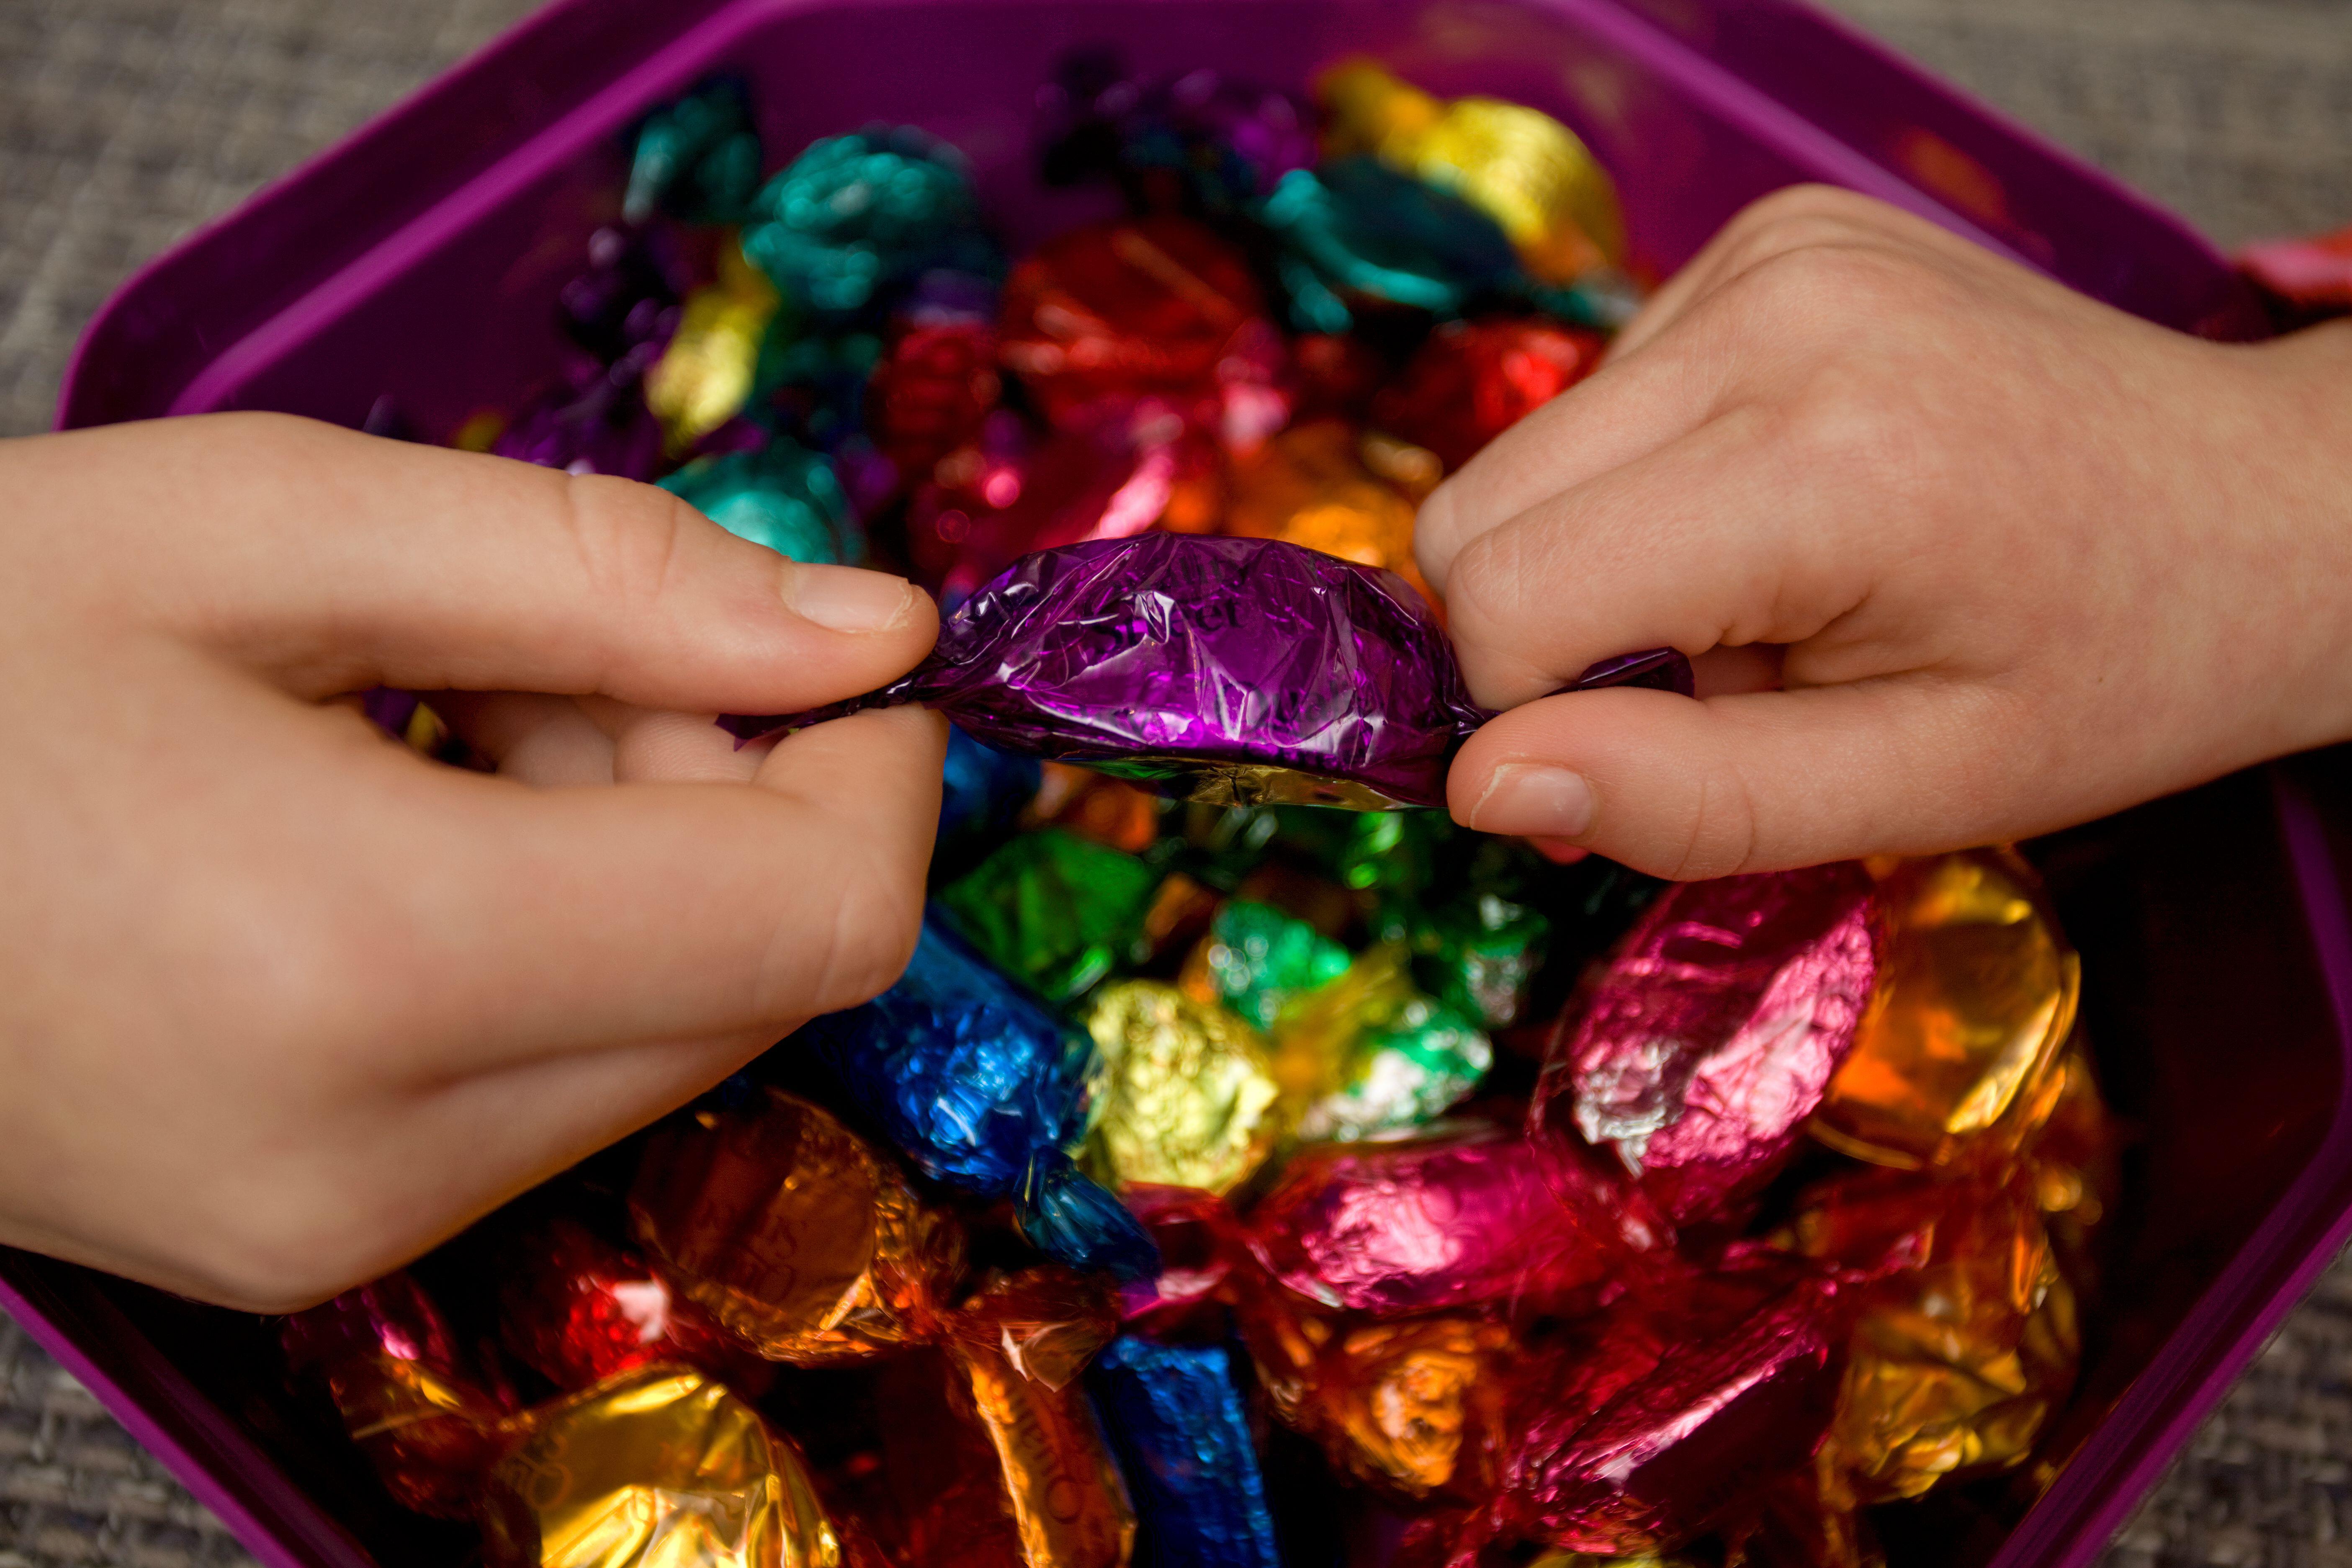 Urgent warning for Quality Street fans after 'dangerous substance' found